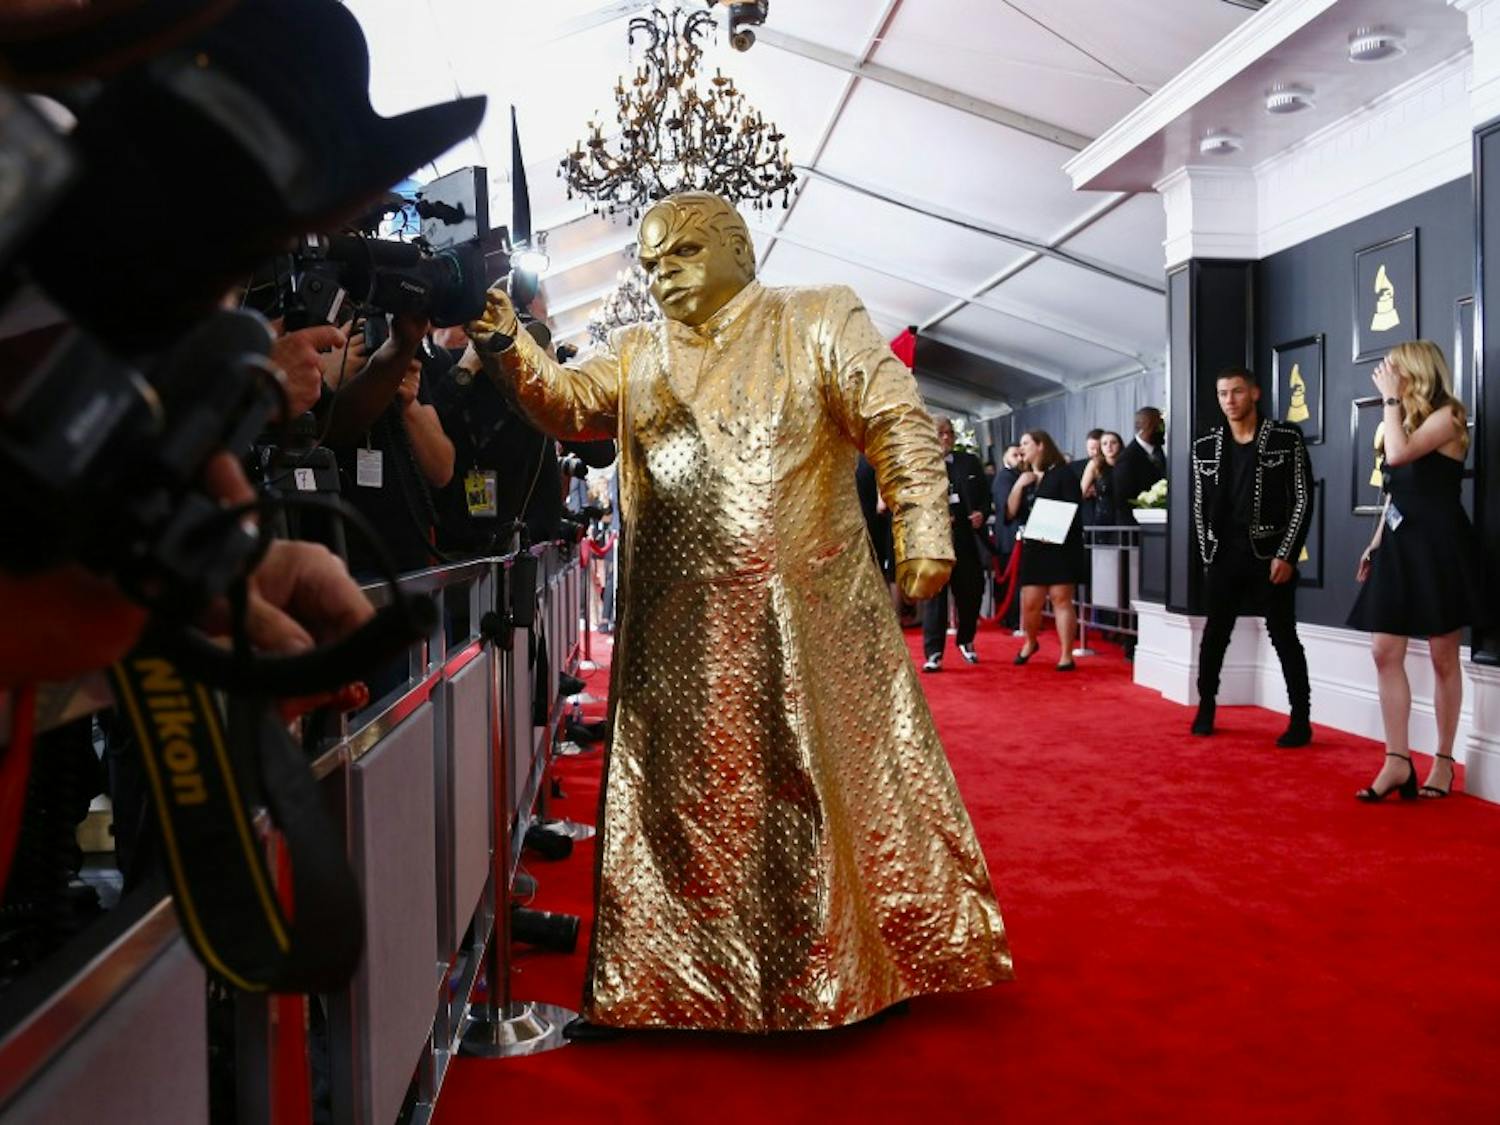 CeeLo Green, as alter ego Gnarly Davidsonn, during the arrivals at the 59th Annual Grammy Awards at Staples Center in Los Angeles on Sunday, Feb. 12, 2017. (Marcus Yam/Los Angeles Times/TNS)